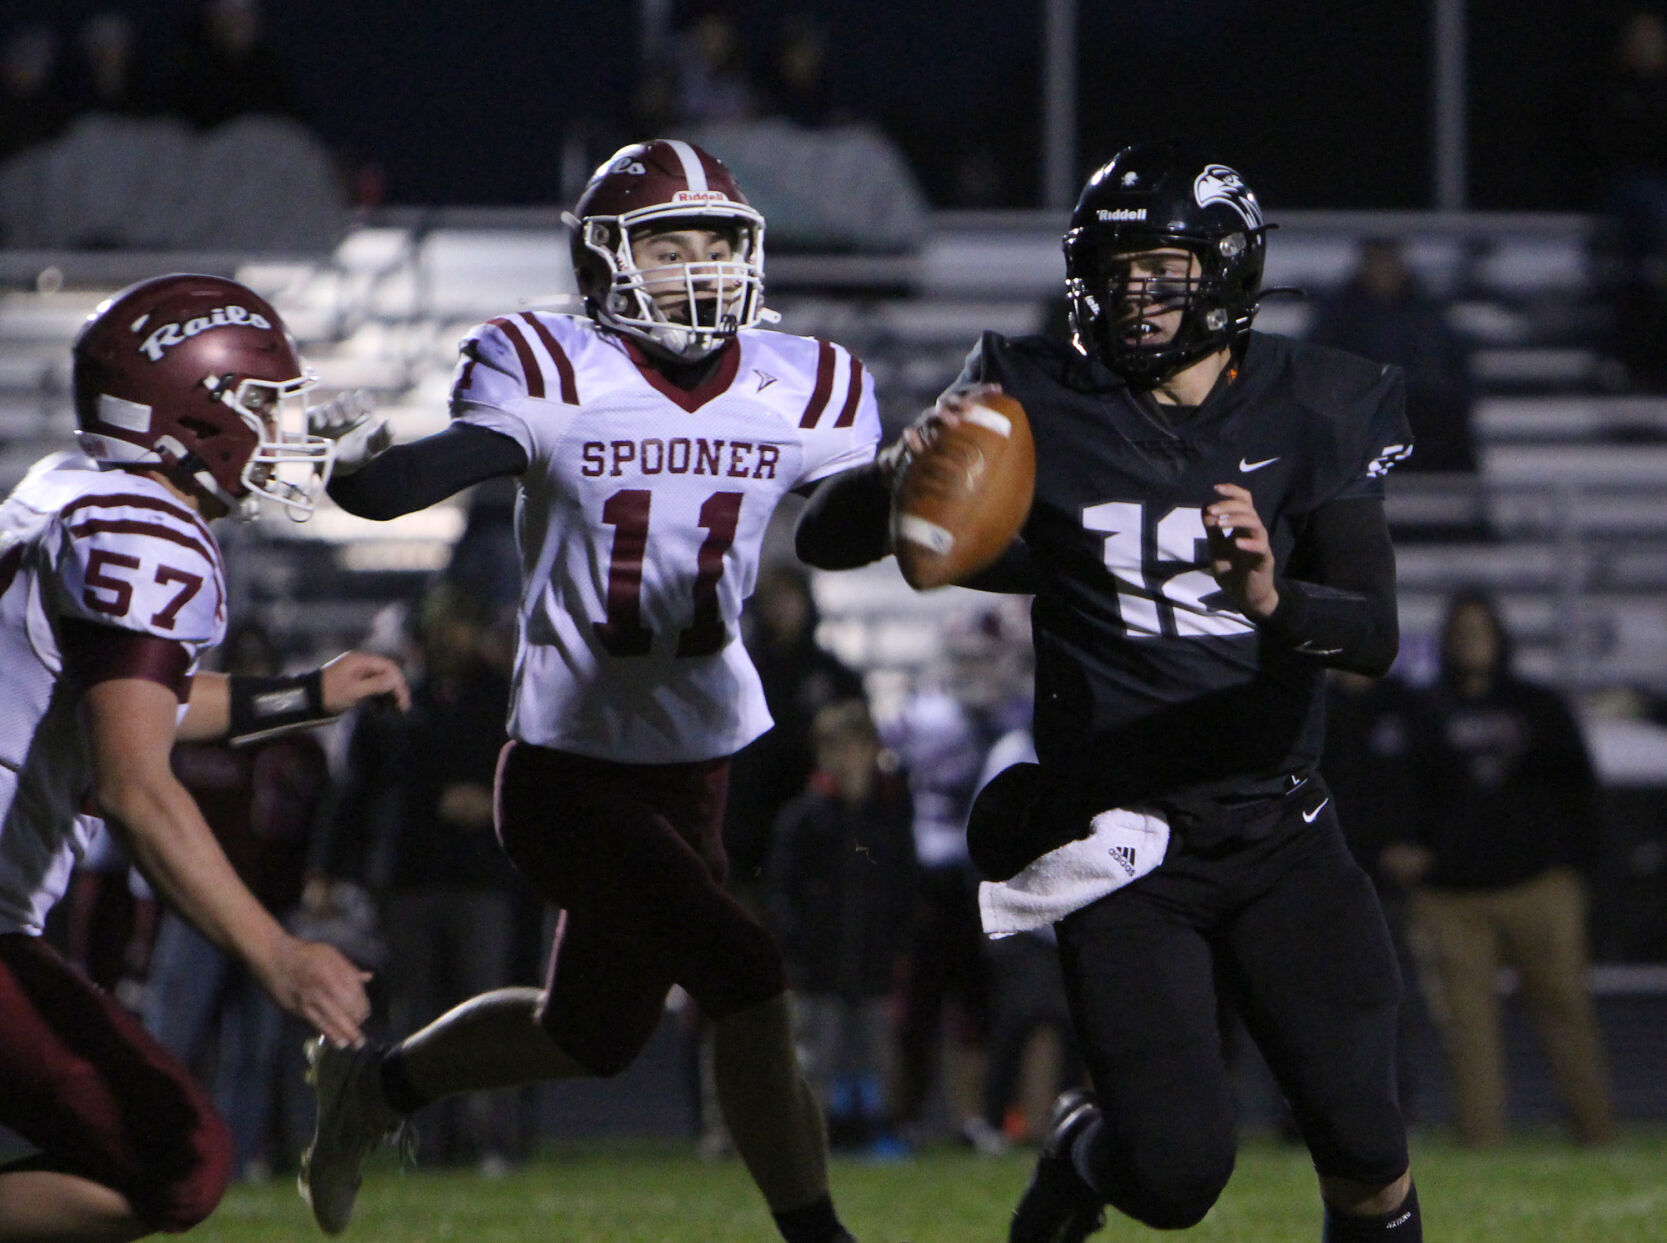 Hudson leads Wisconsin high school football standings with perfect record